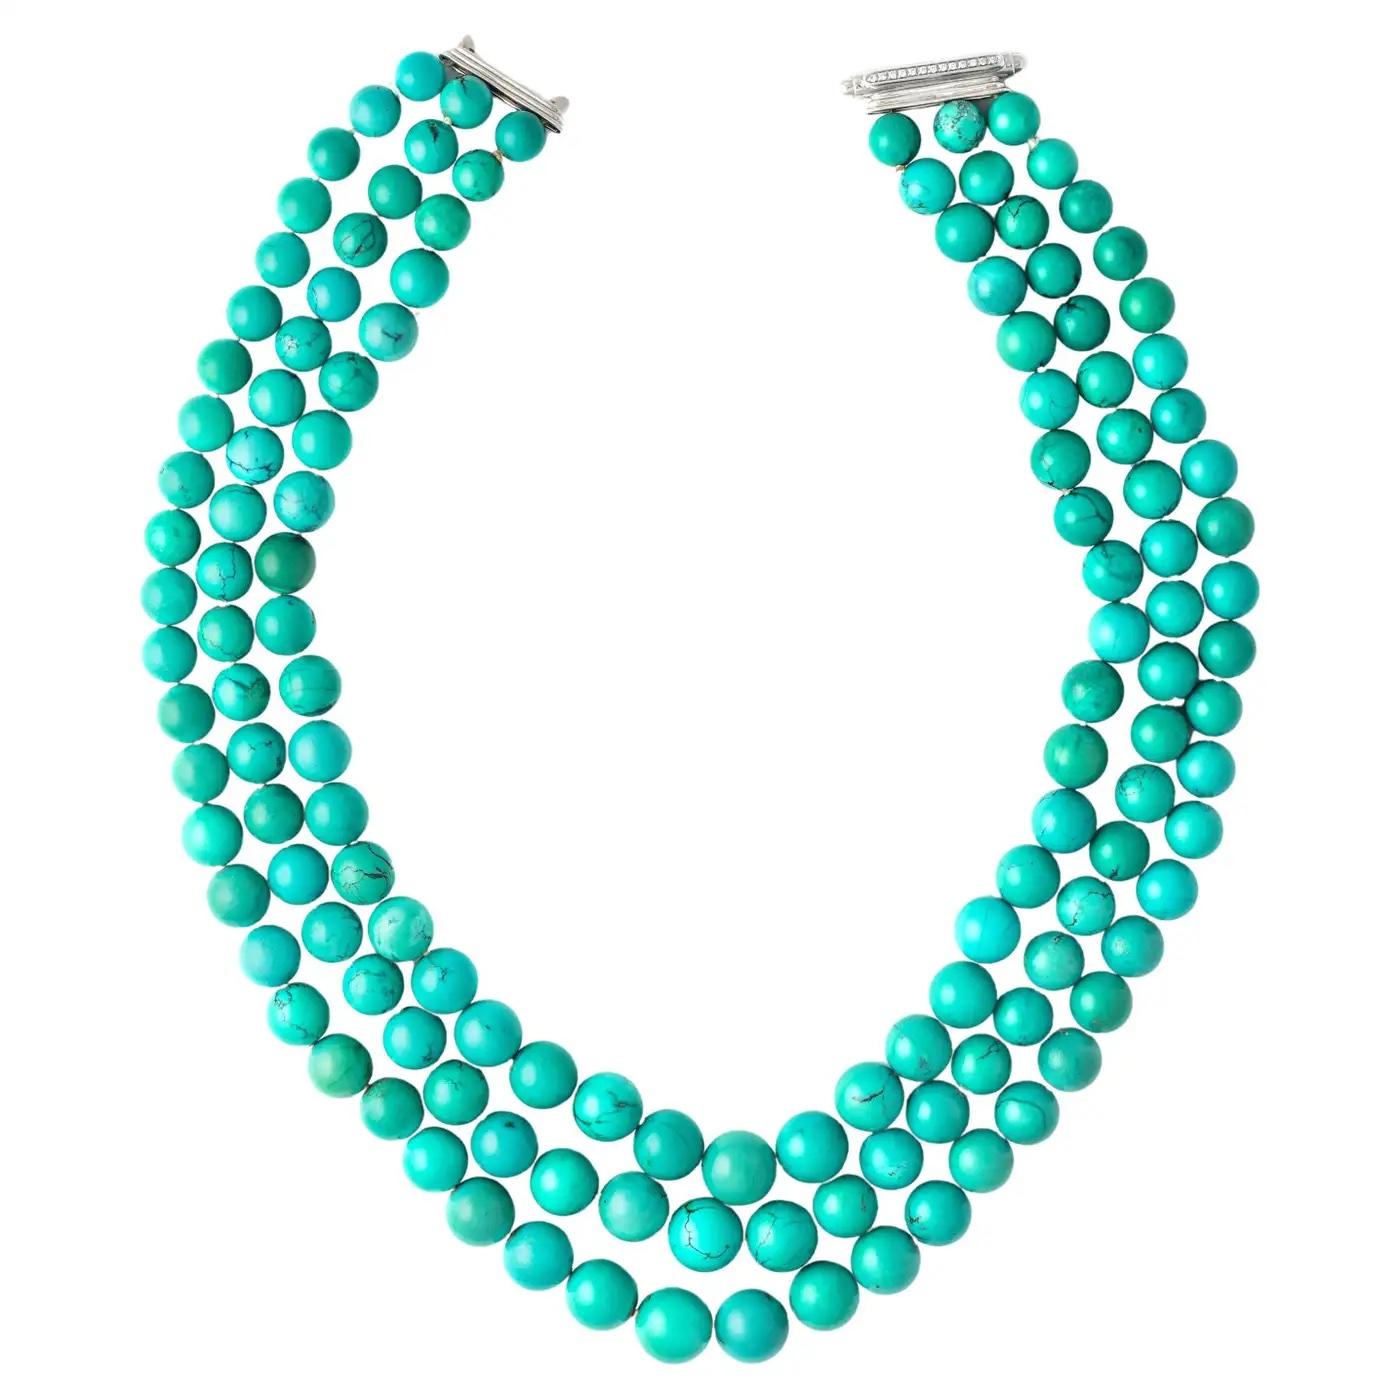 Bead Natural Turquoise Diamond Necklace For Sale